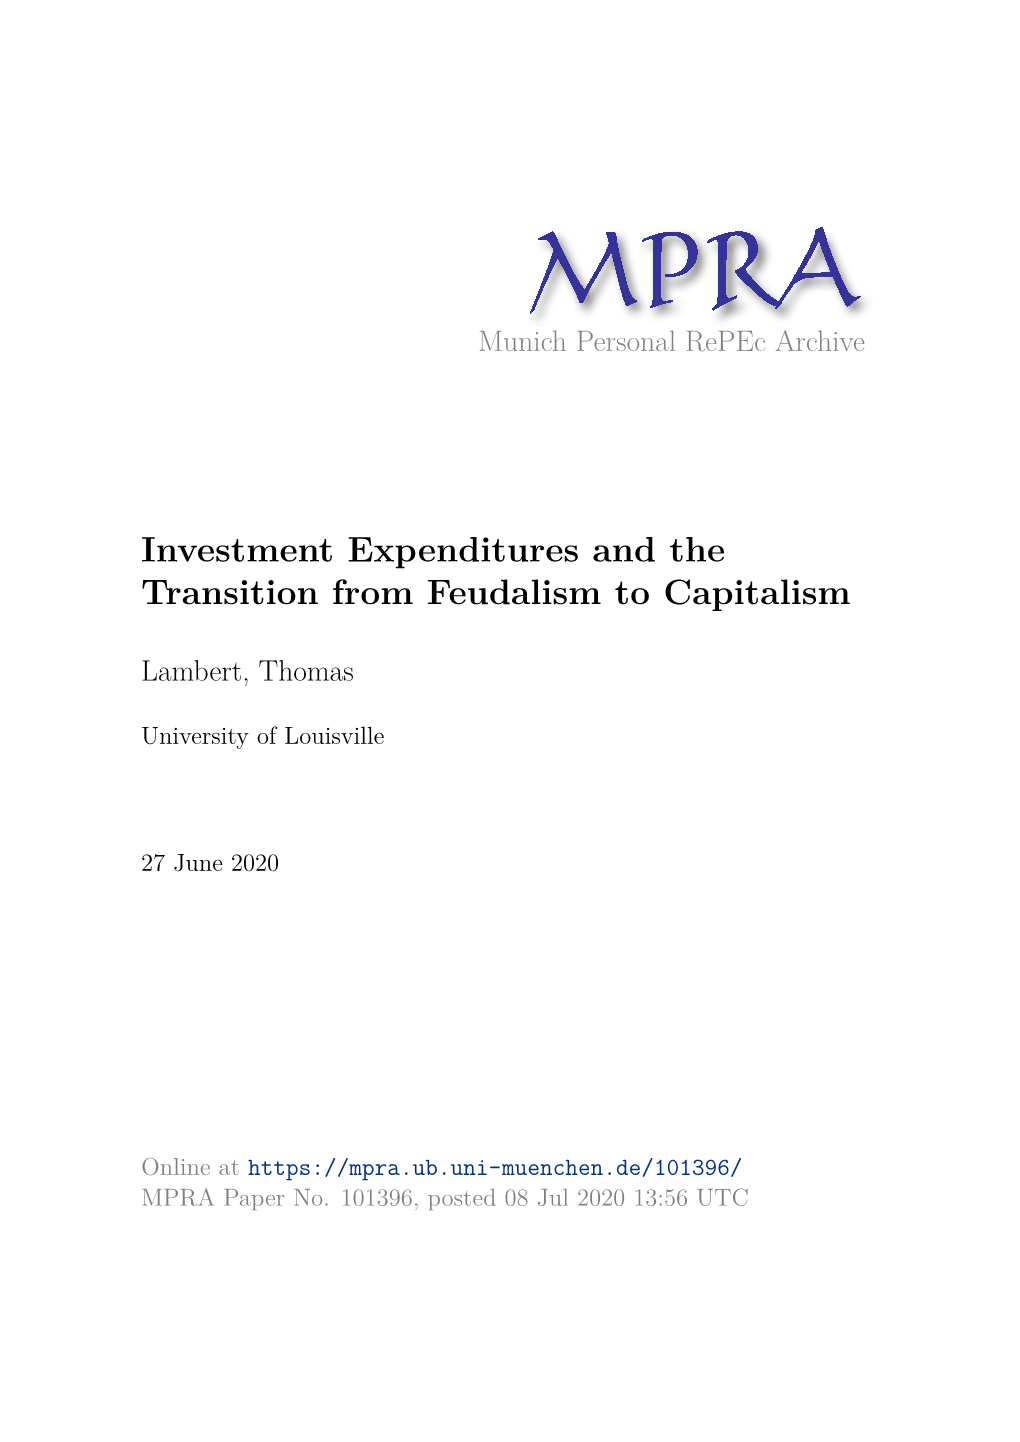 Investment Expenditures and the Transition from Feudalism to Capitalism